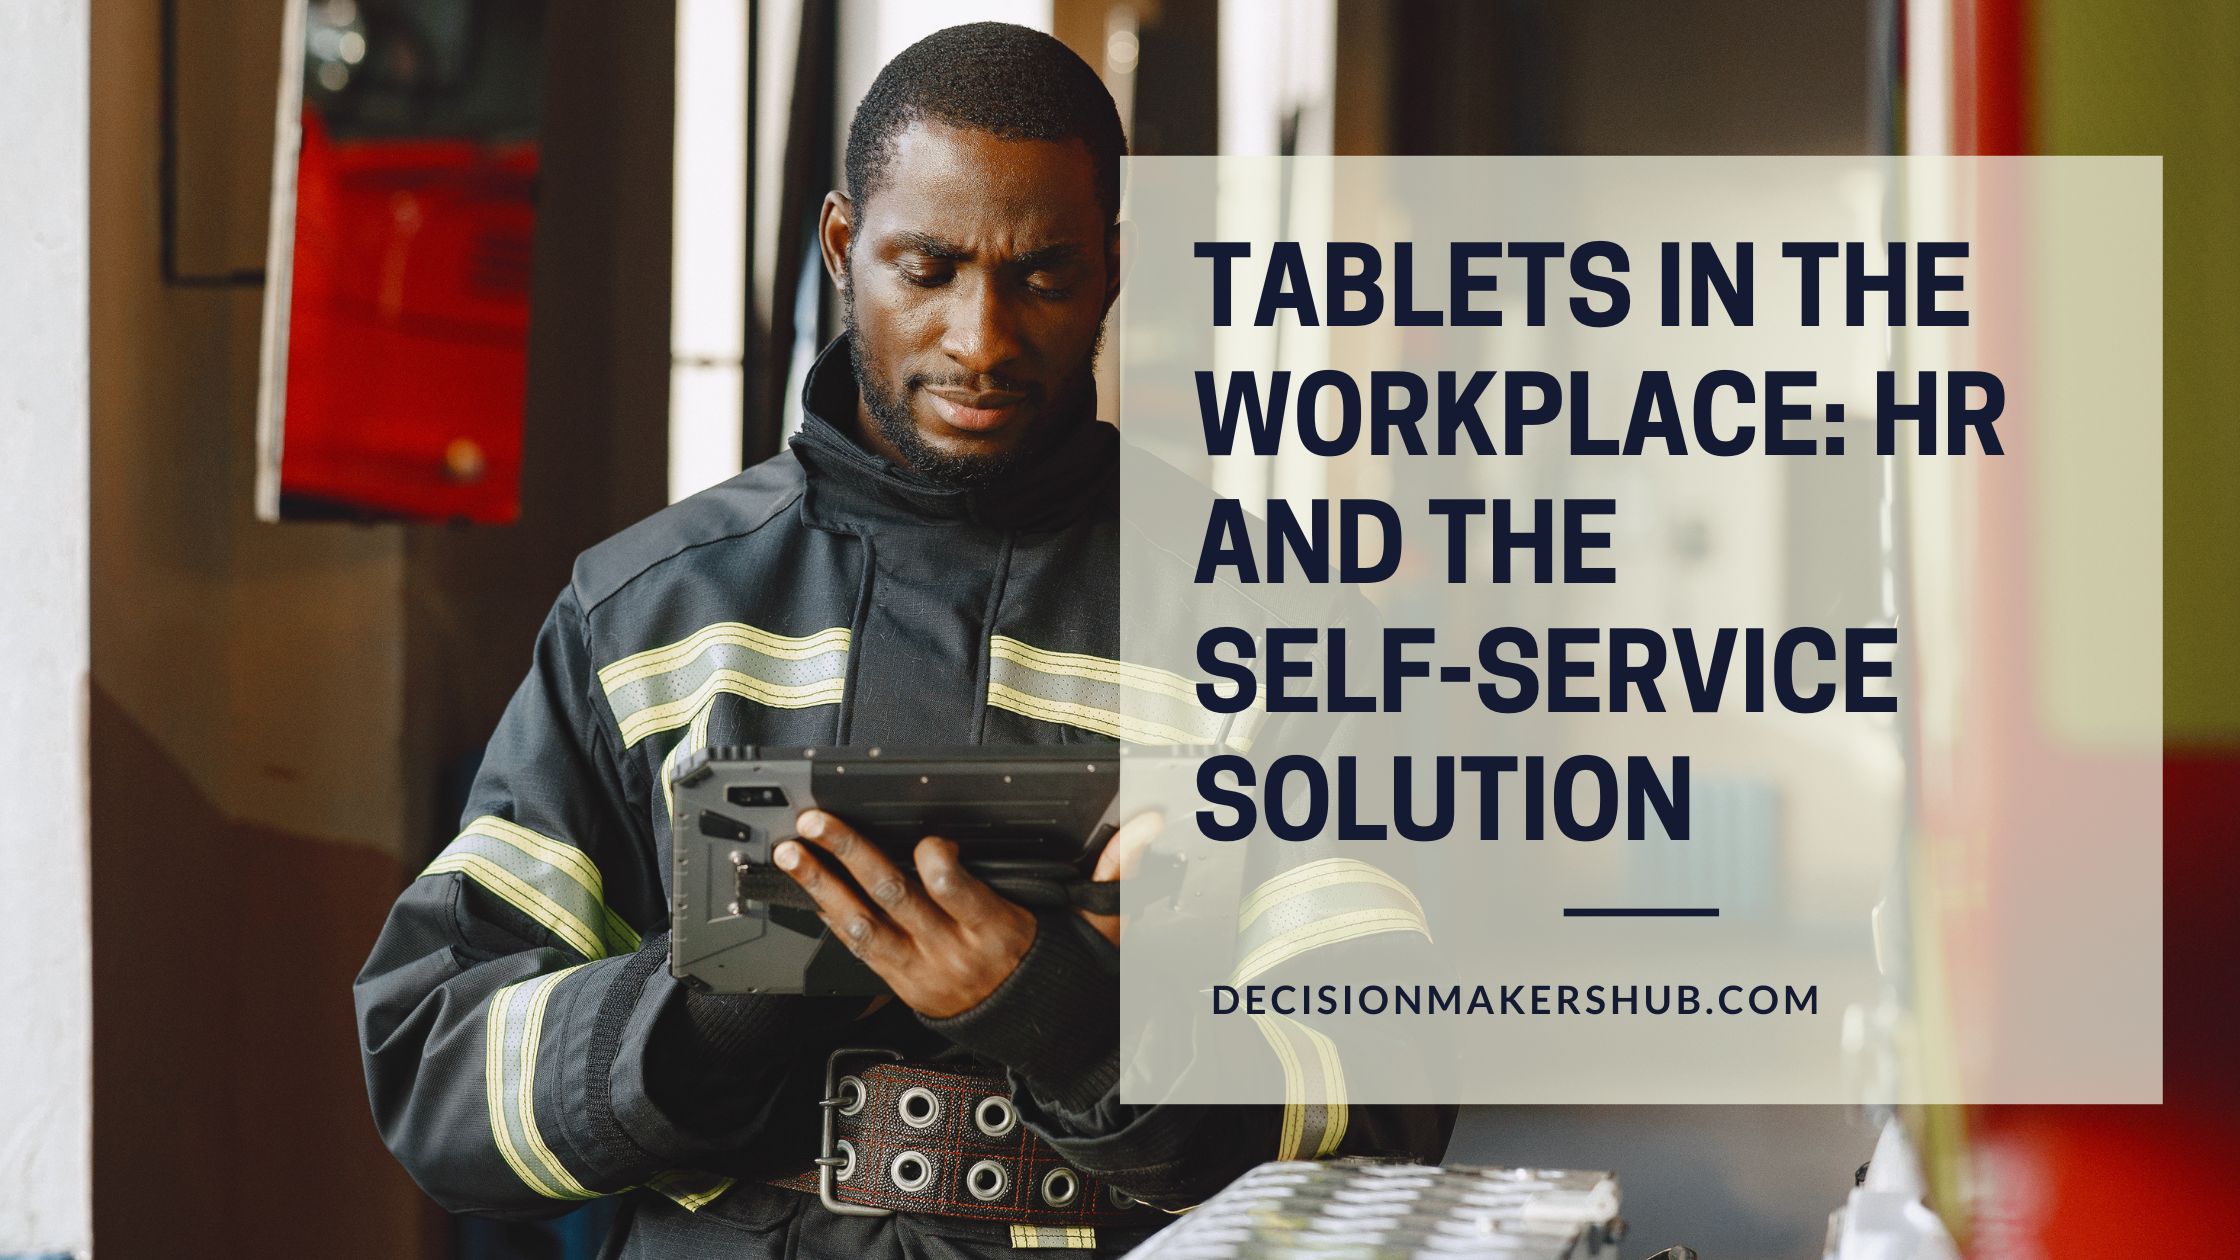 Tablets in the Workplace: HR and the Self-Service Solution